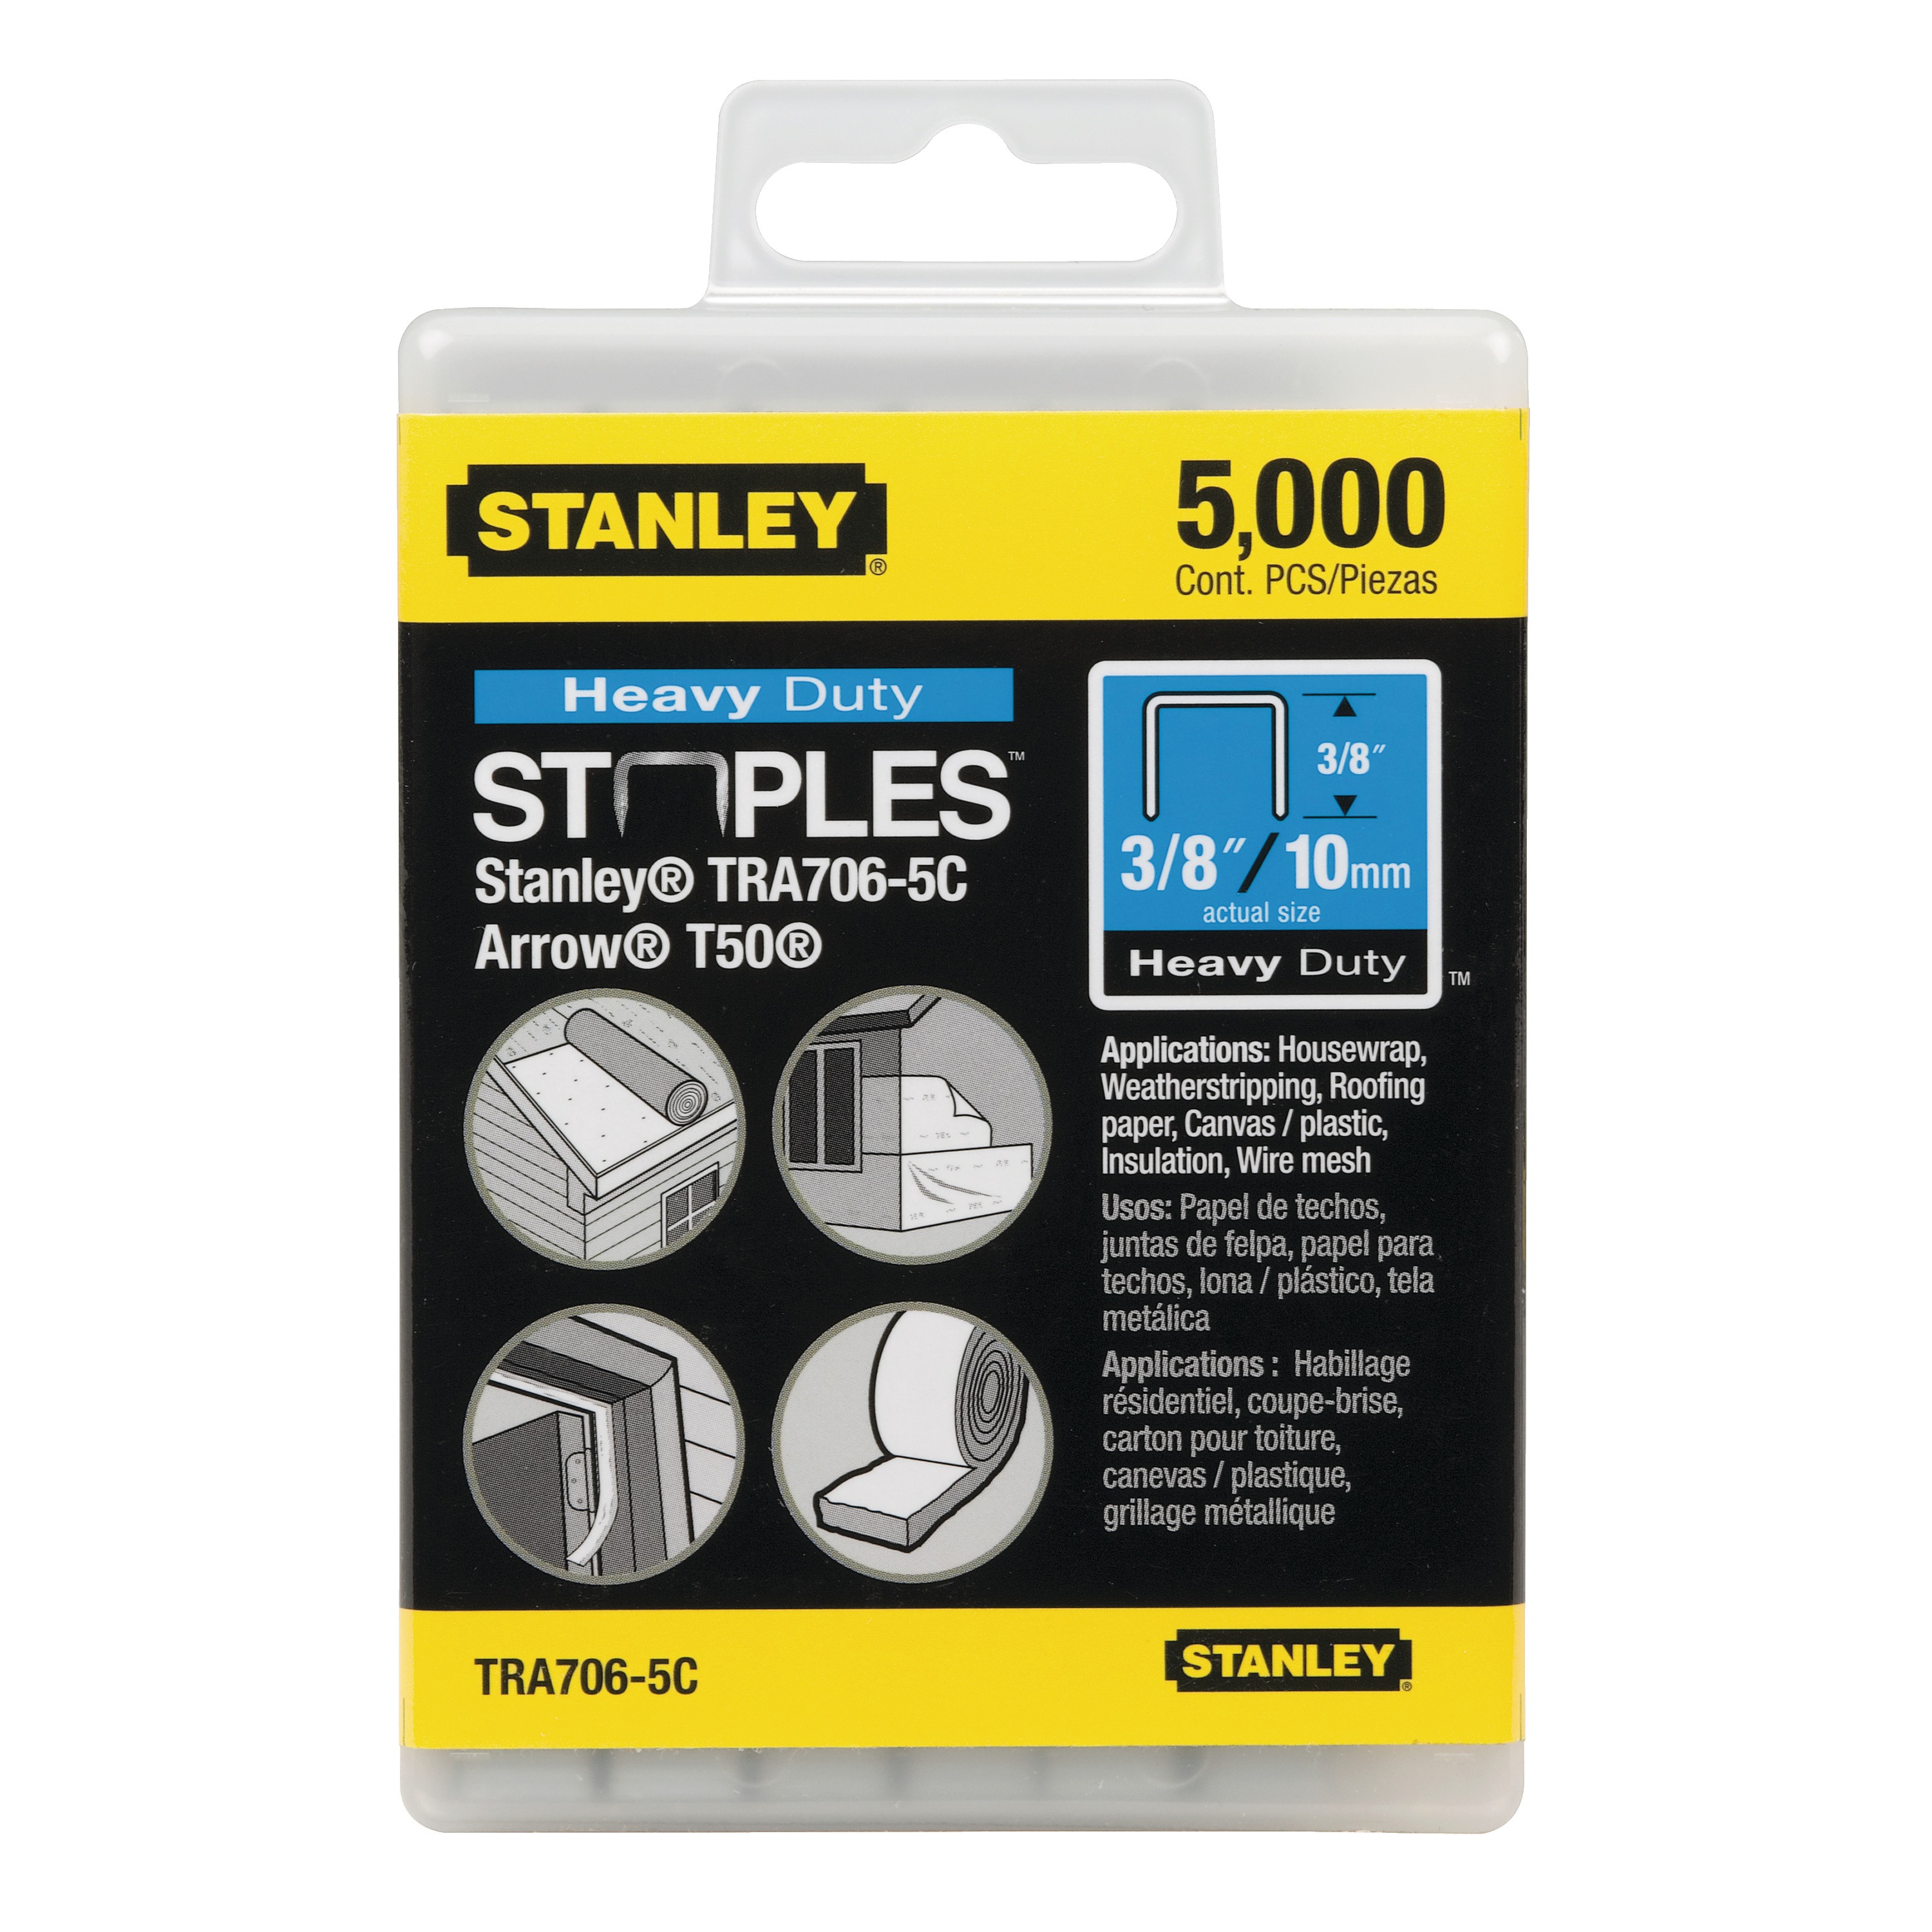 Stanley 1,000 Count 3/8" Heavy-Duty Staples TRA706T 